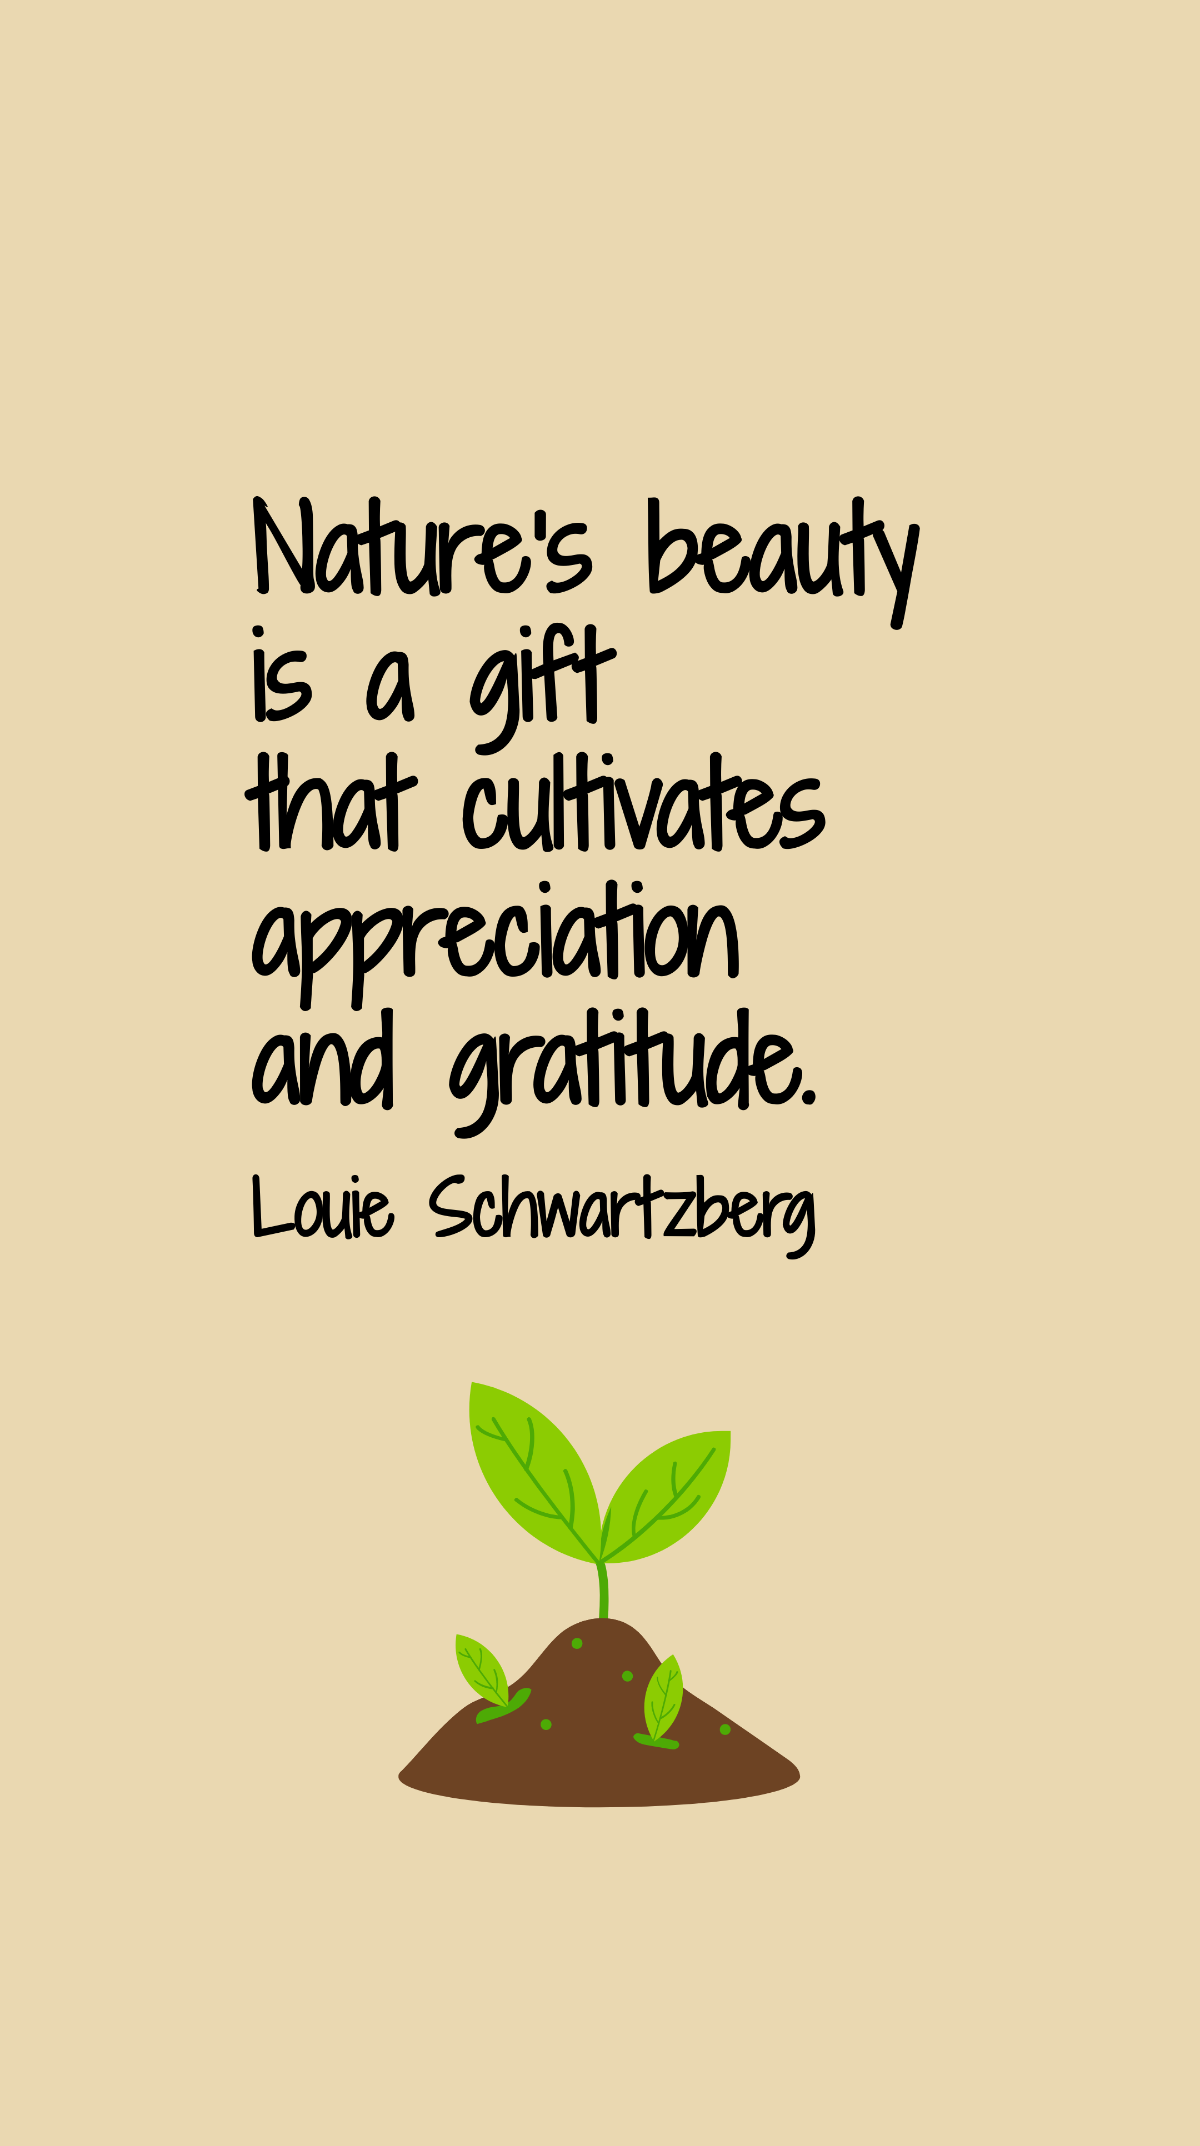 Louie Schwartzberg - Nature's beauty is a gift that cultivates appreciation and gratitude. Template